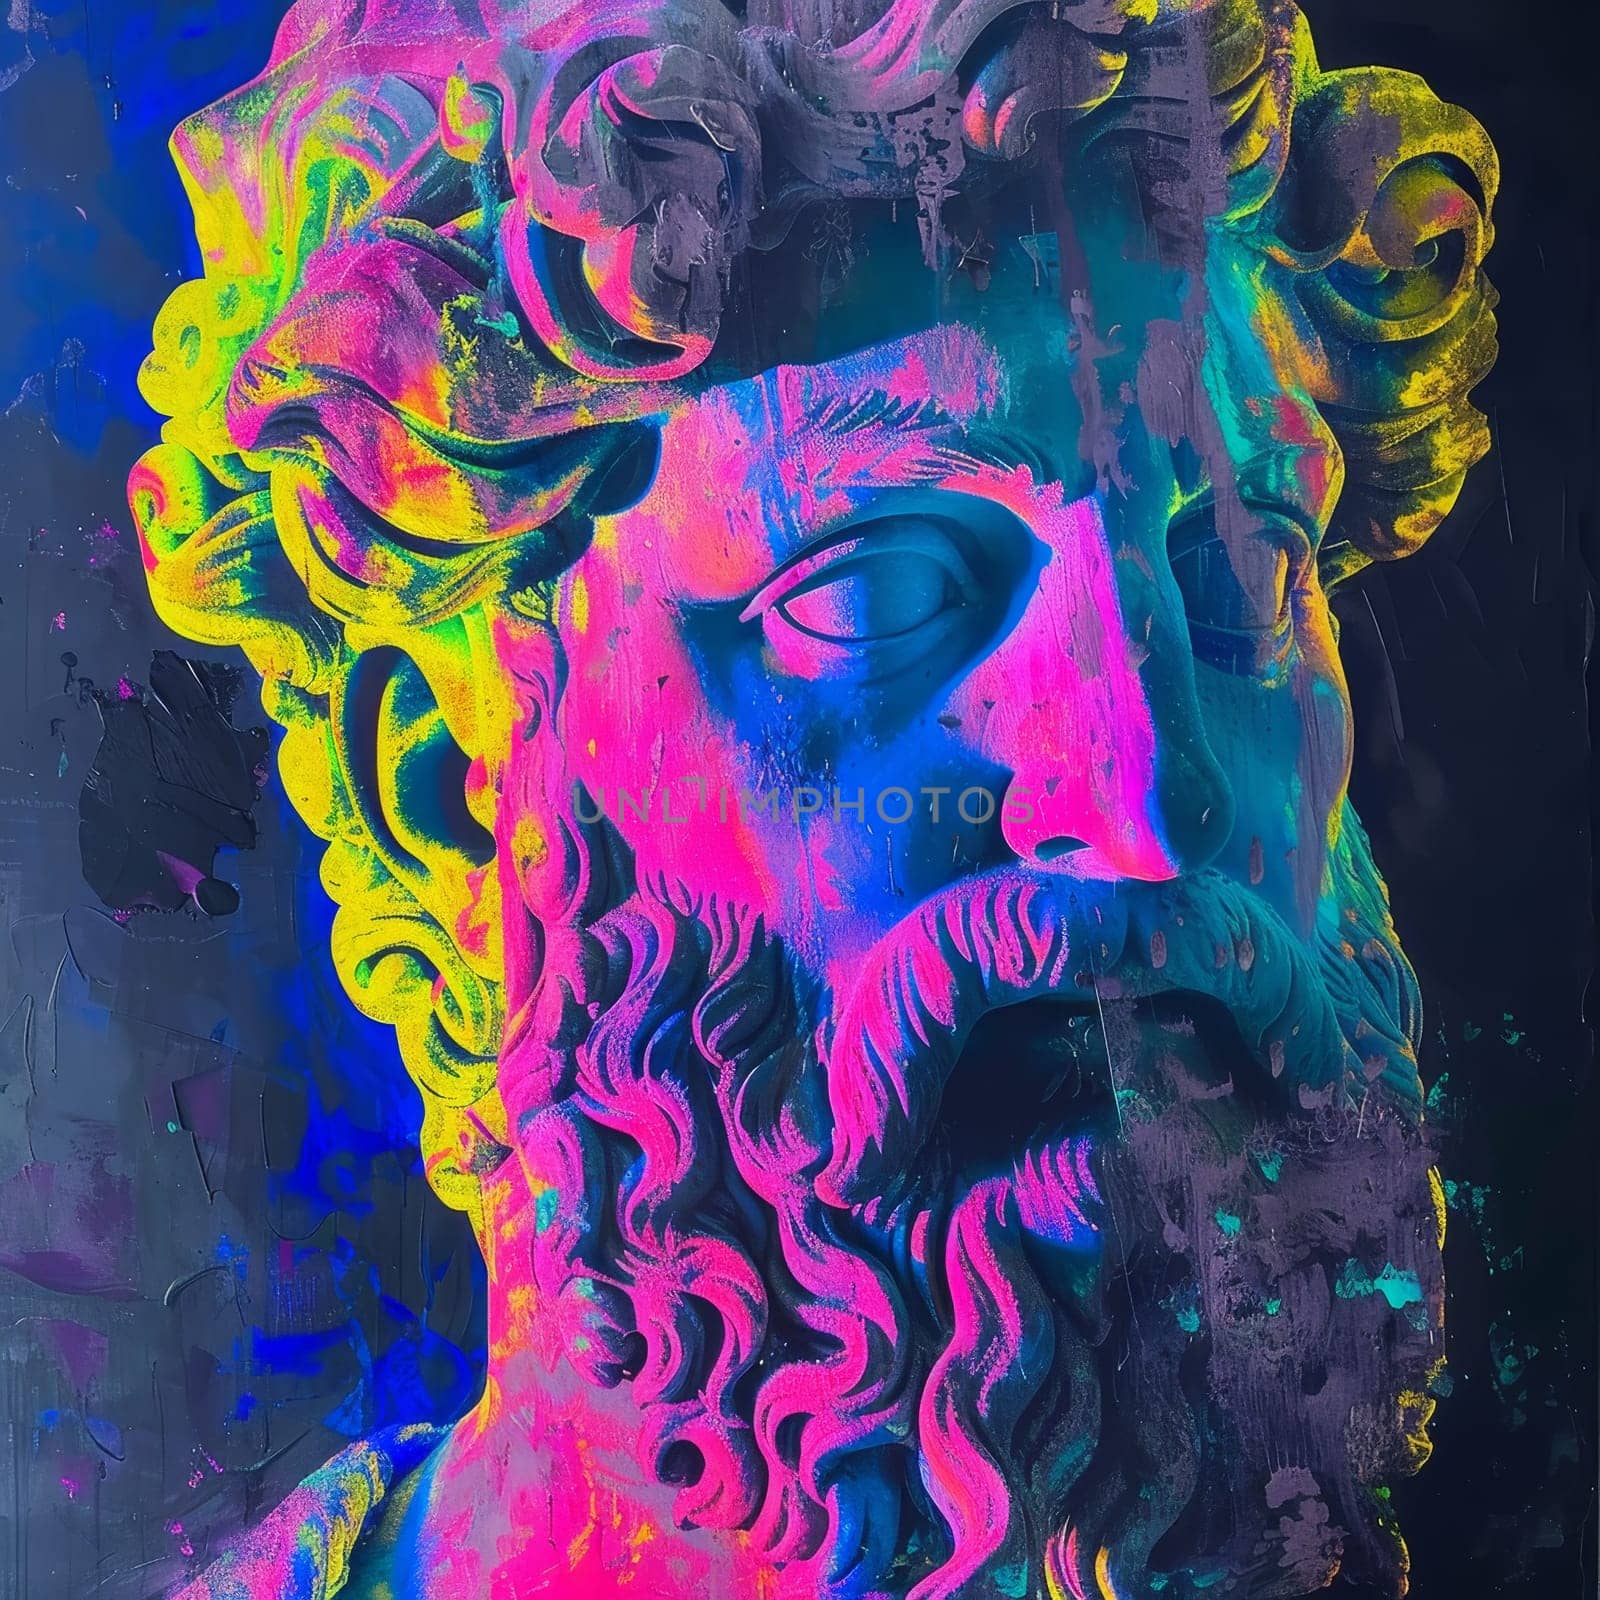 Classical statue illuminated with vibrant neon colors in an artistic display. by sfinks